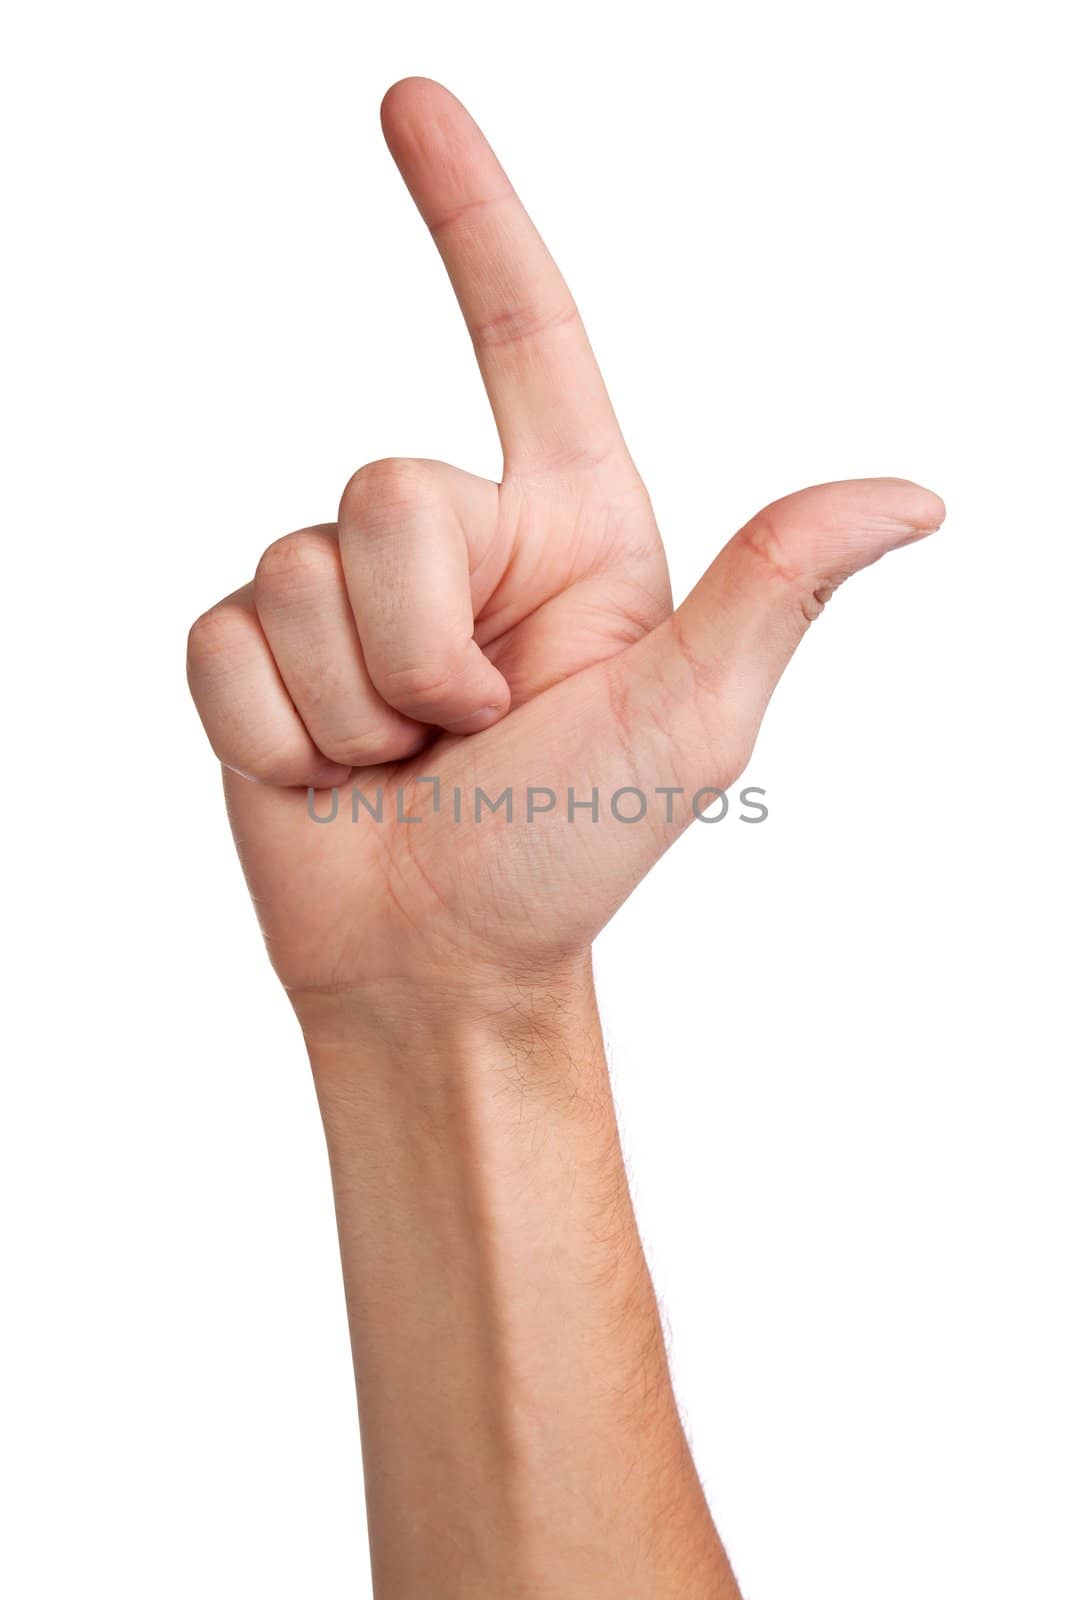 Pointing hand (or shooting or aiming) isolated on a white background